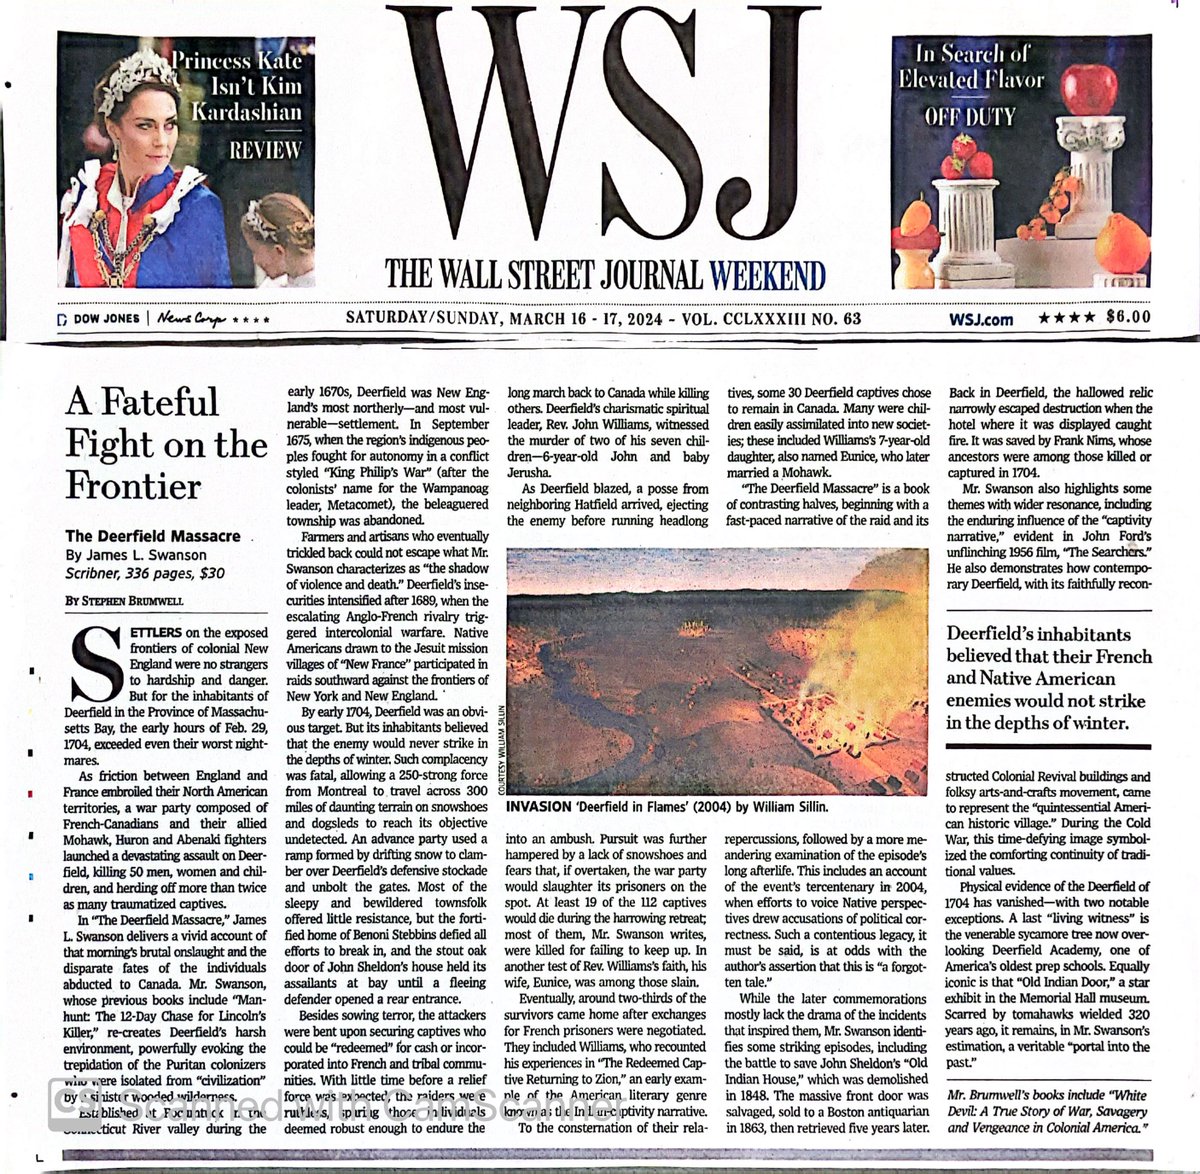 Thrilled to share this weekend's @WSJ review of my new book the Deerfield Massacre: A Surprise Attack, a Forced March, and the Fight for Survival in Early America. Order it today on Amazon! amazon.com/Deerfield-Mass…